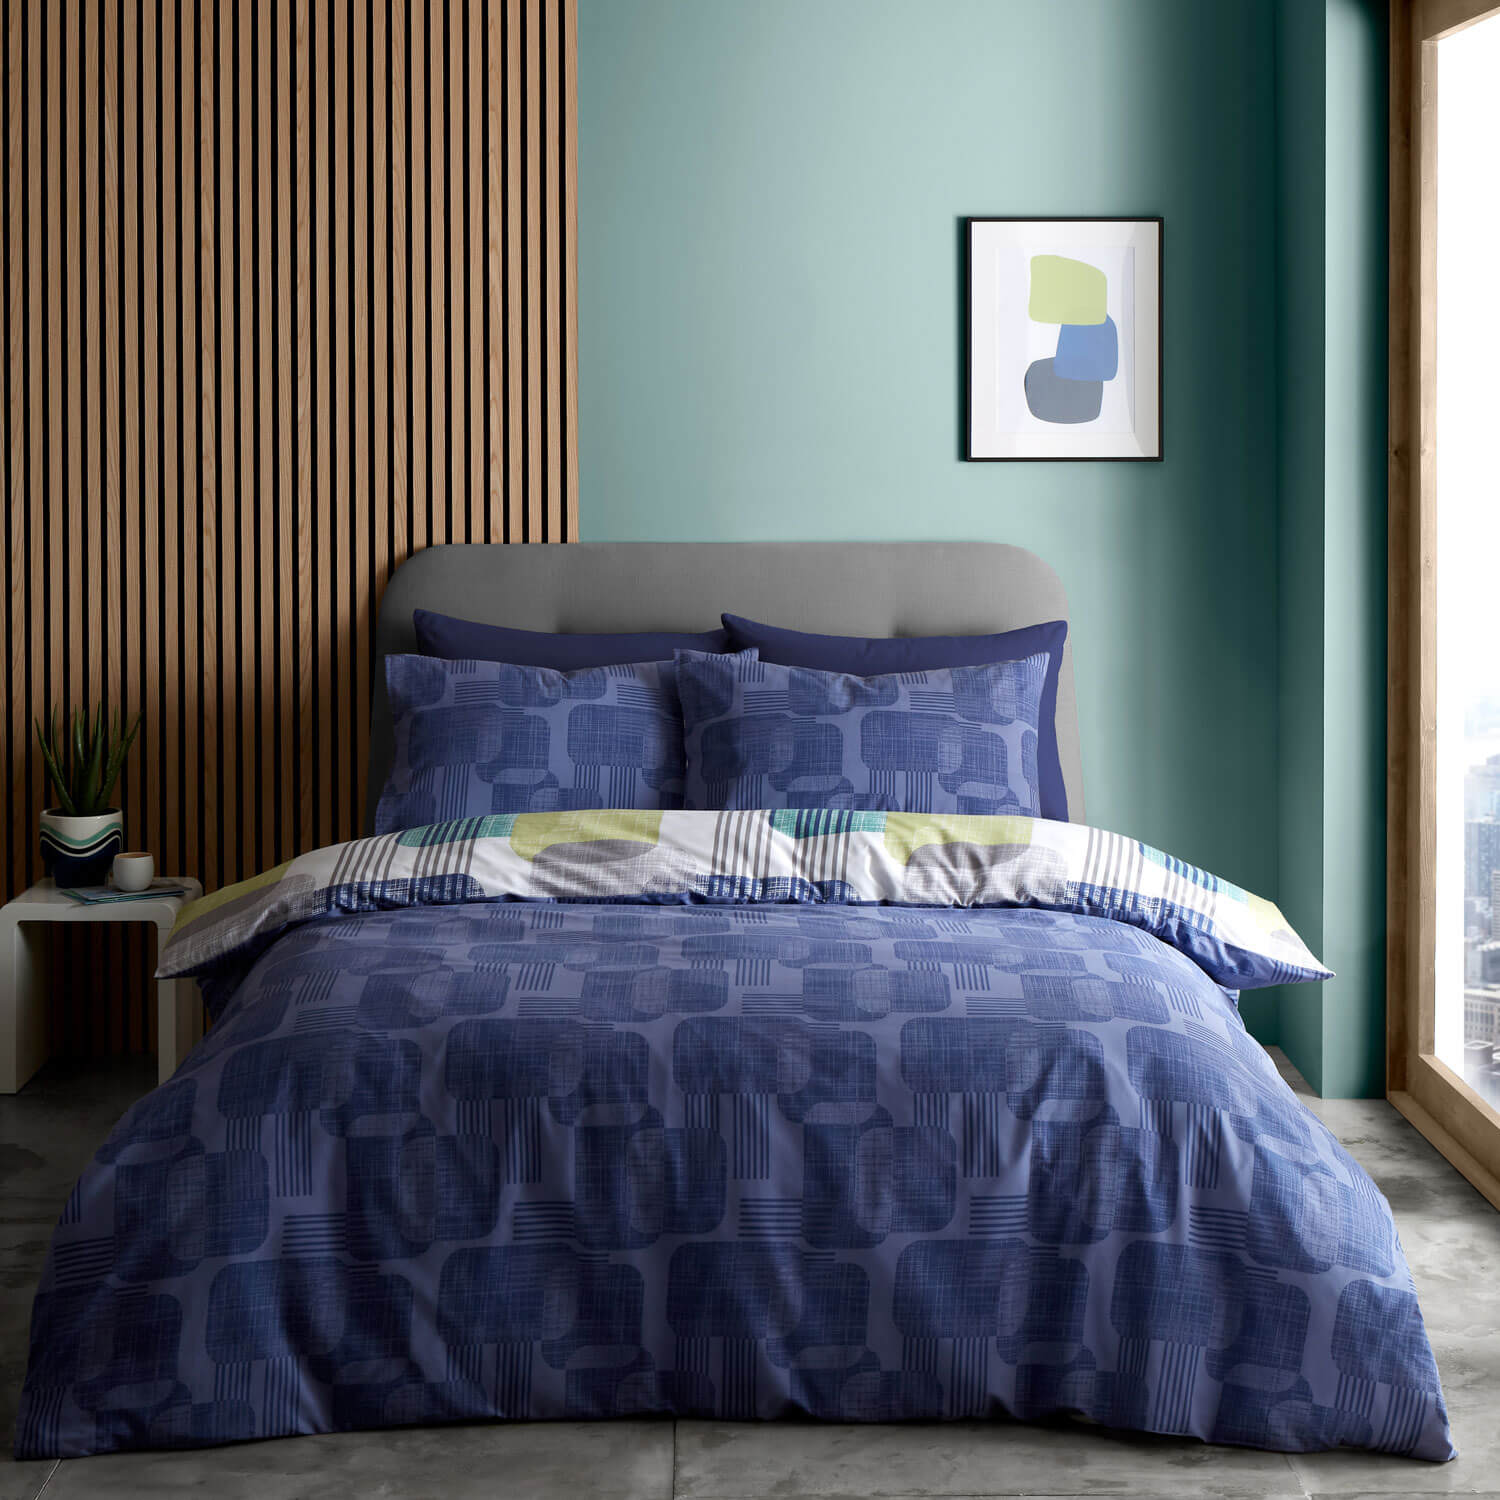  The Home Collection Layered Geo Duvet Cover Set 2 Shaws Department Stores